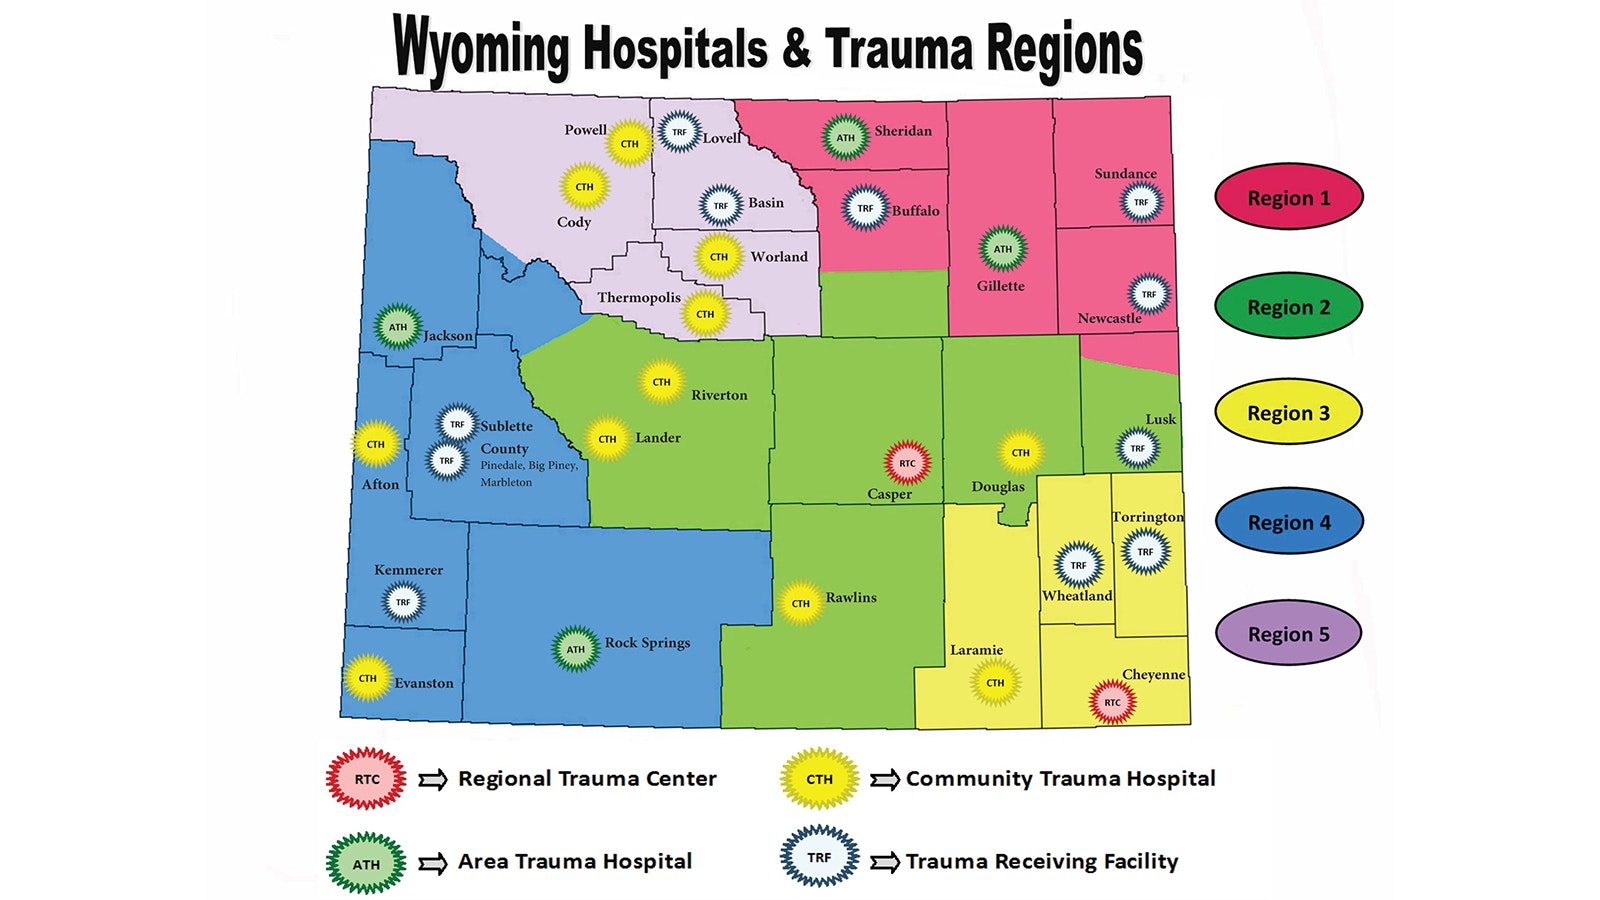 Wyoming's statewide trauma network is divided into five trauma regions that coordinate with each other so patients receive the best possible care. The state of Wyoming has designated its own trauma centers, but only one hospital — Banner Wyoming Medical Center in Casper — is verified by the American College of Surgeons.